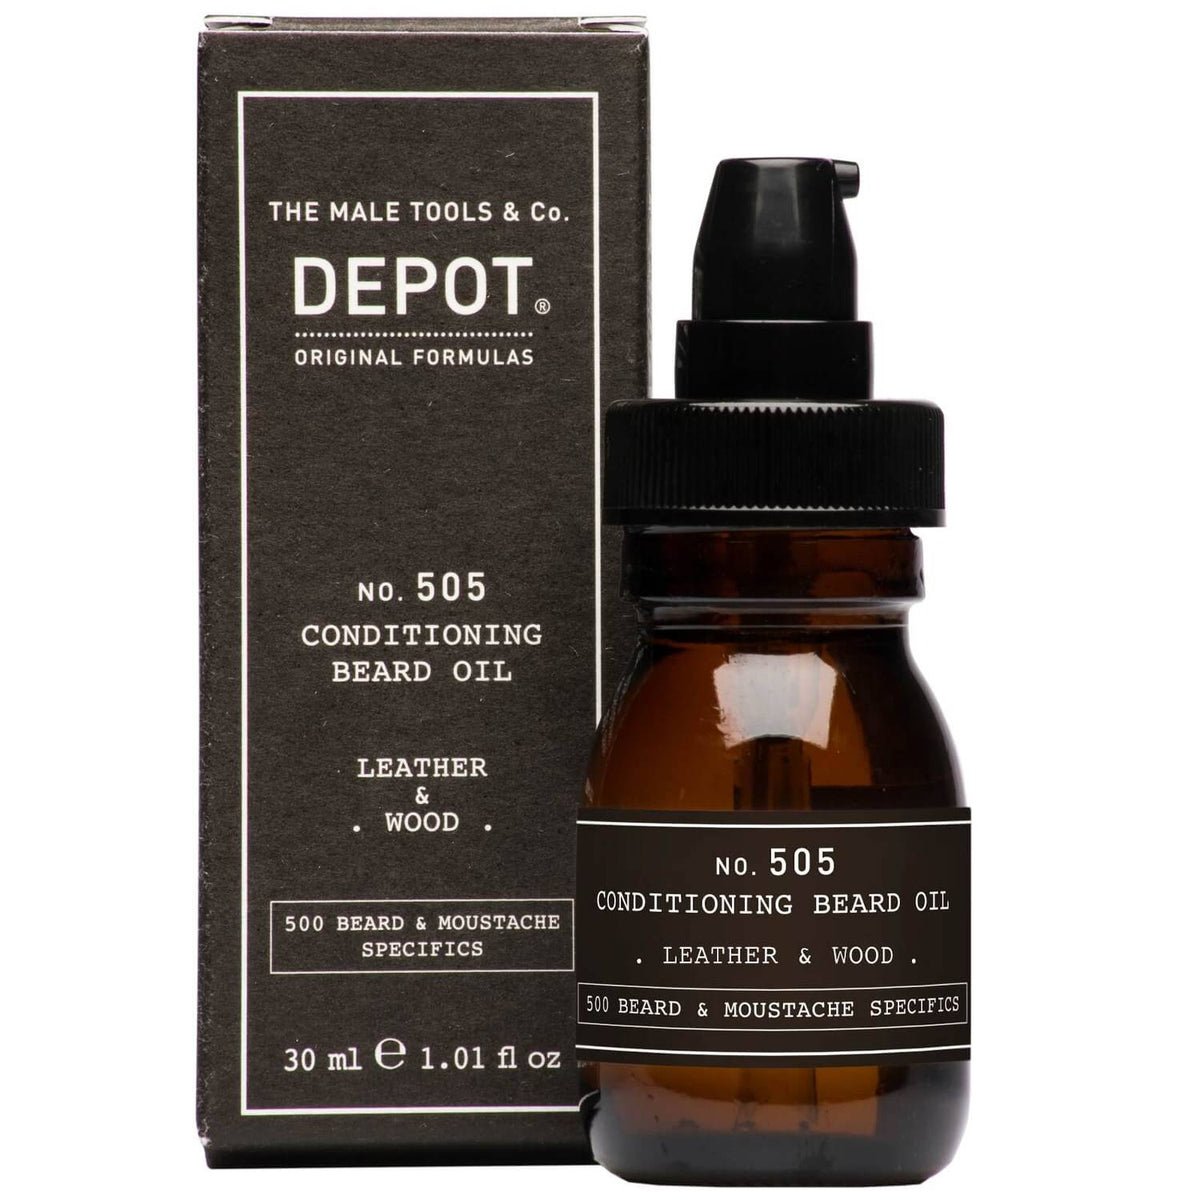 DEPOT NO. 505 CONDITIONING BEARD OIL .LEATHER & WOOD. 30ml